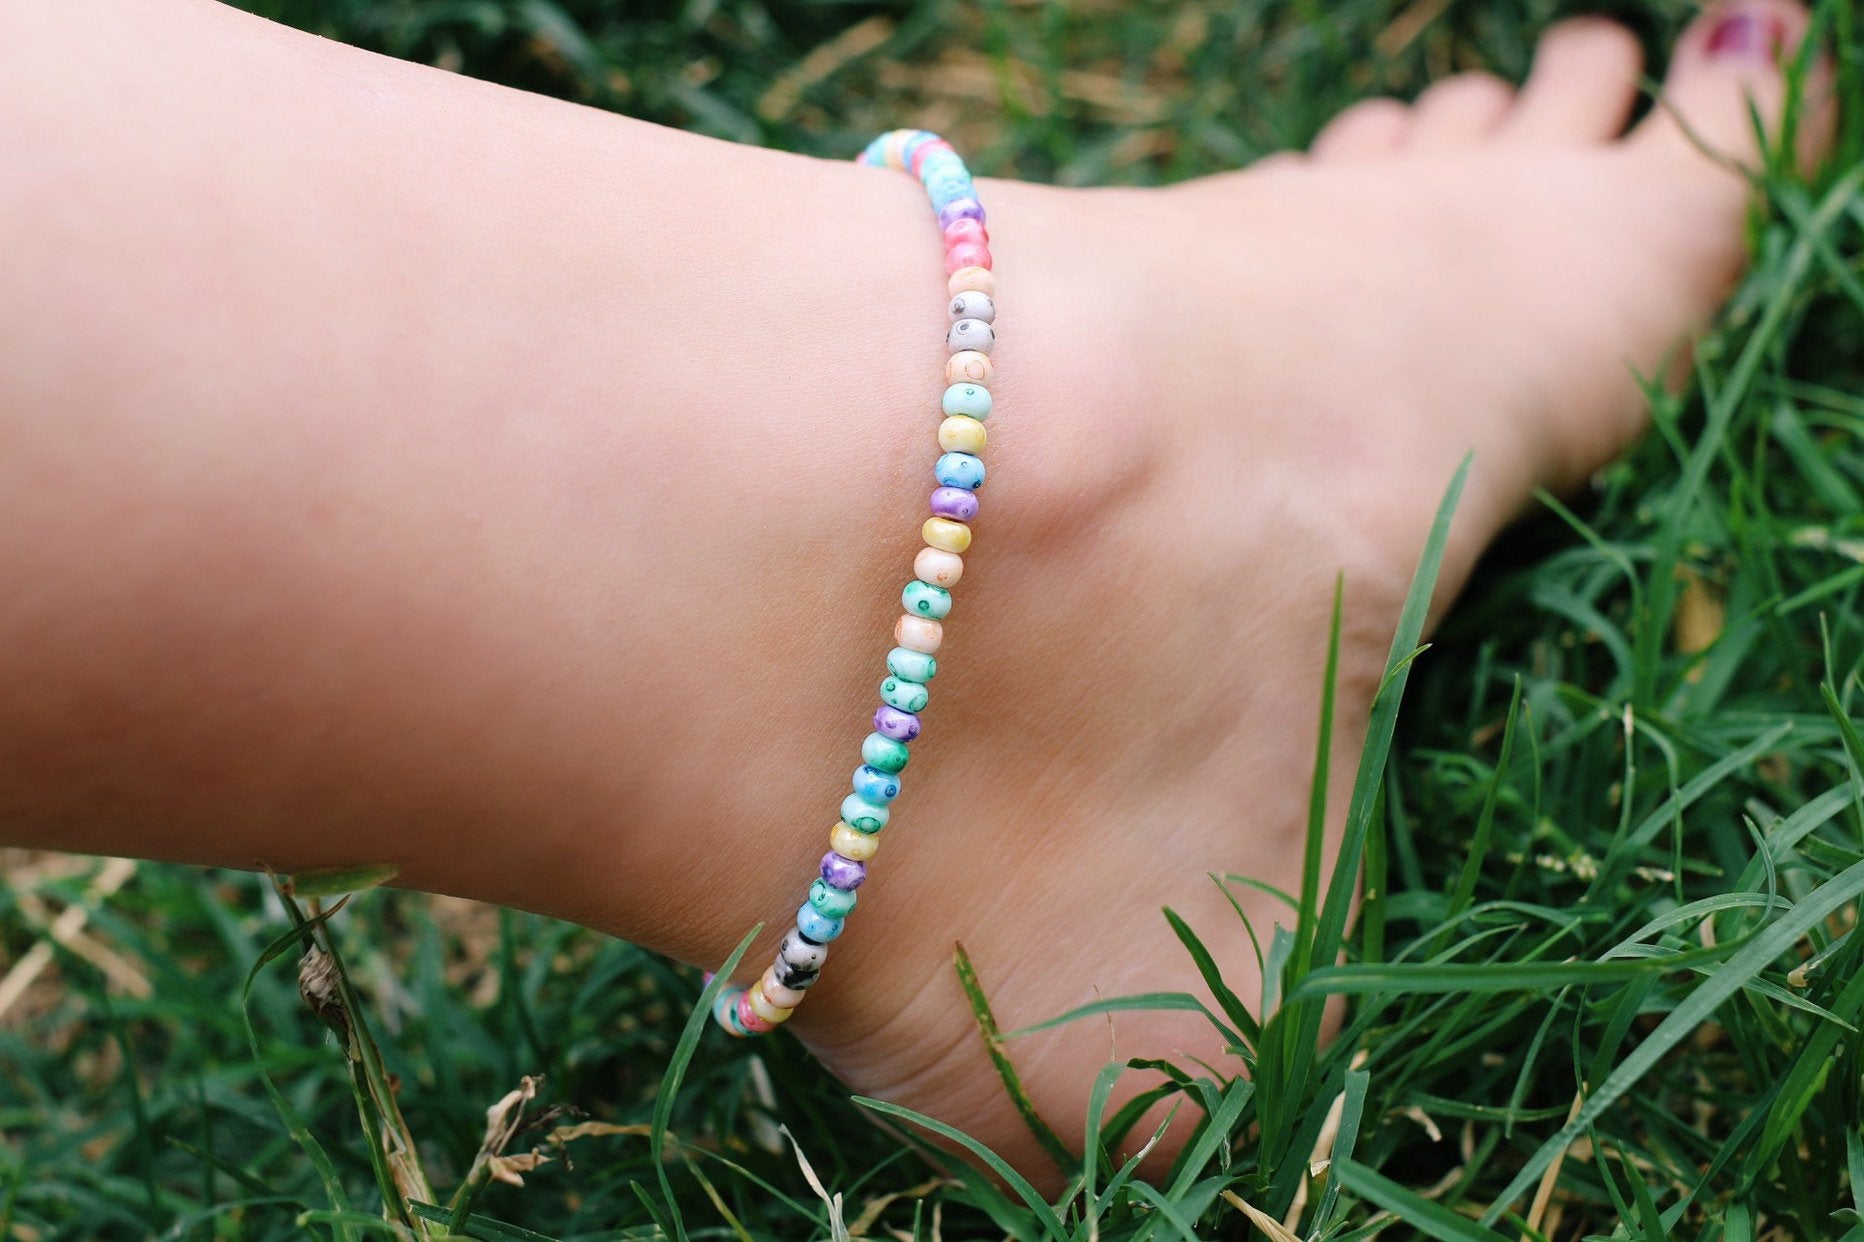 How To Tie An Anklet